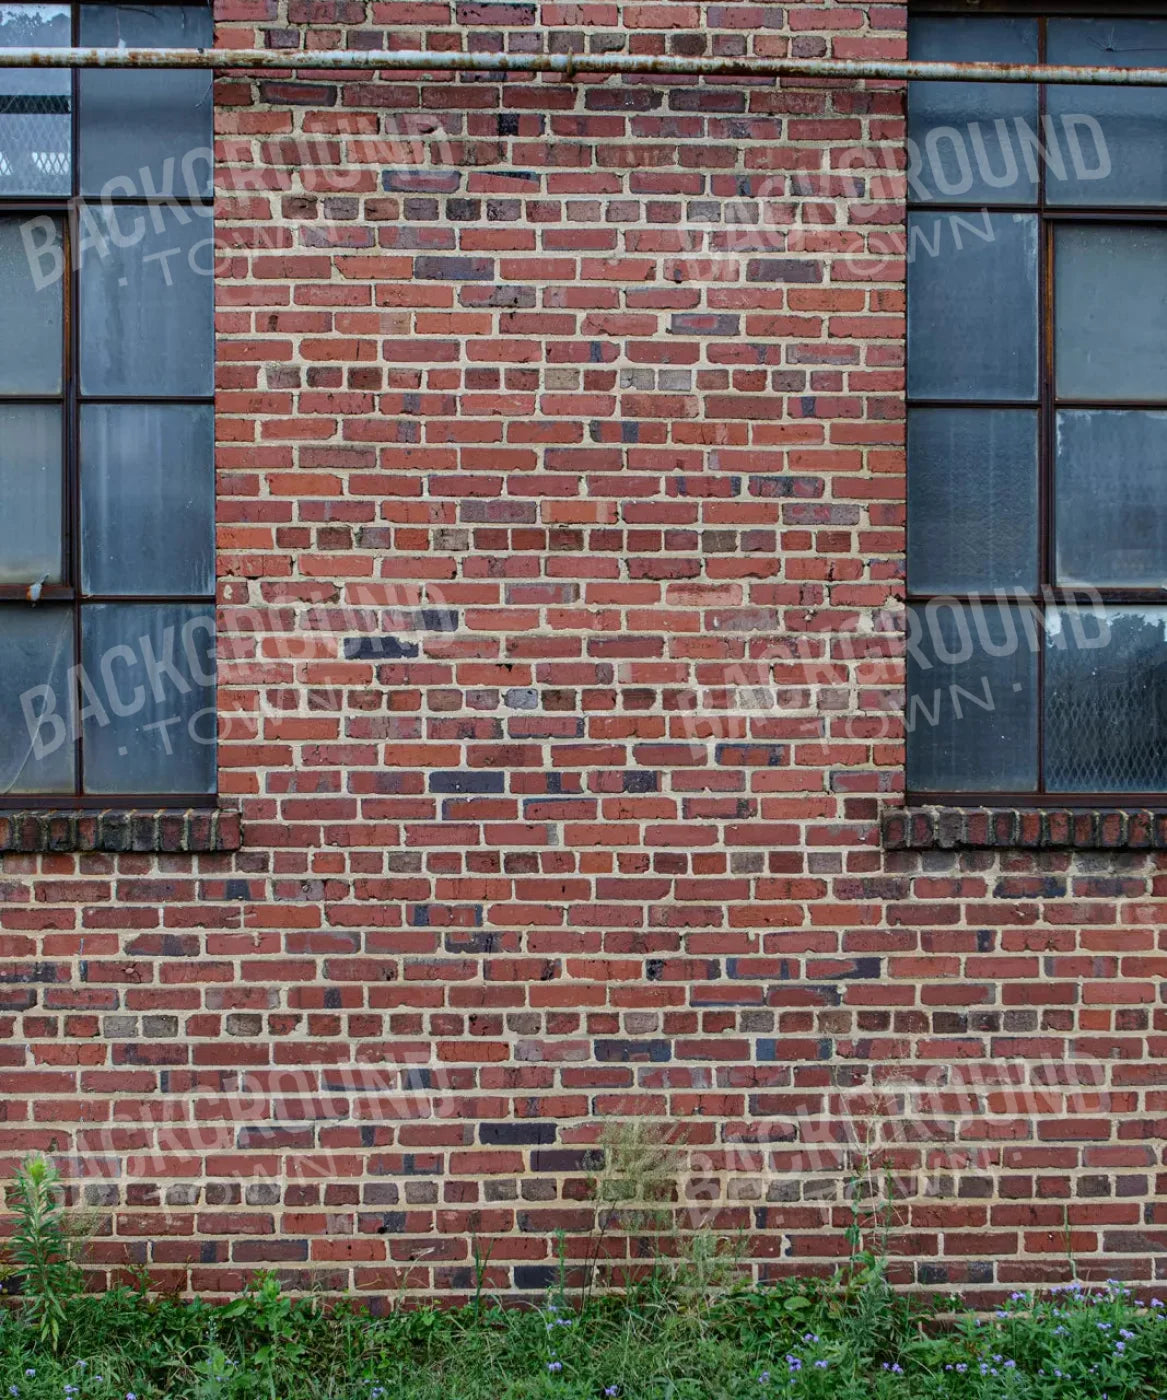 Brown Brick and Stone Backdrop for Photography